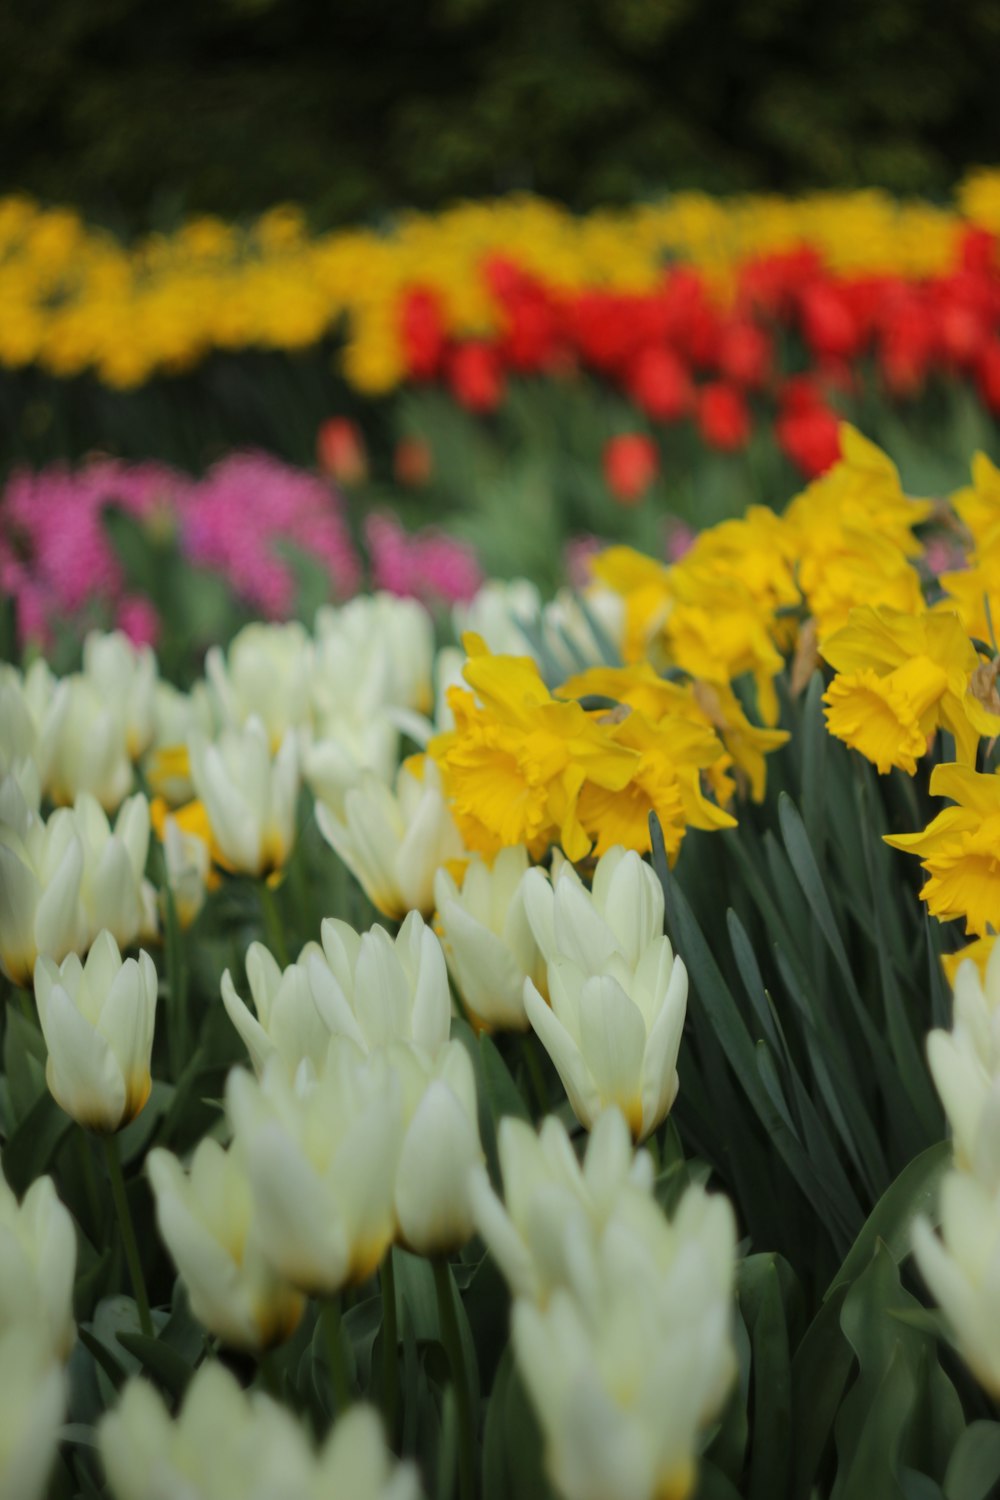 white and yellow tulips in bloom during daytime